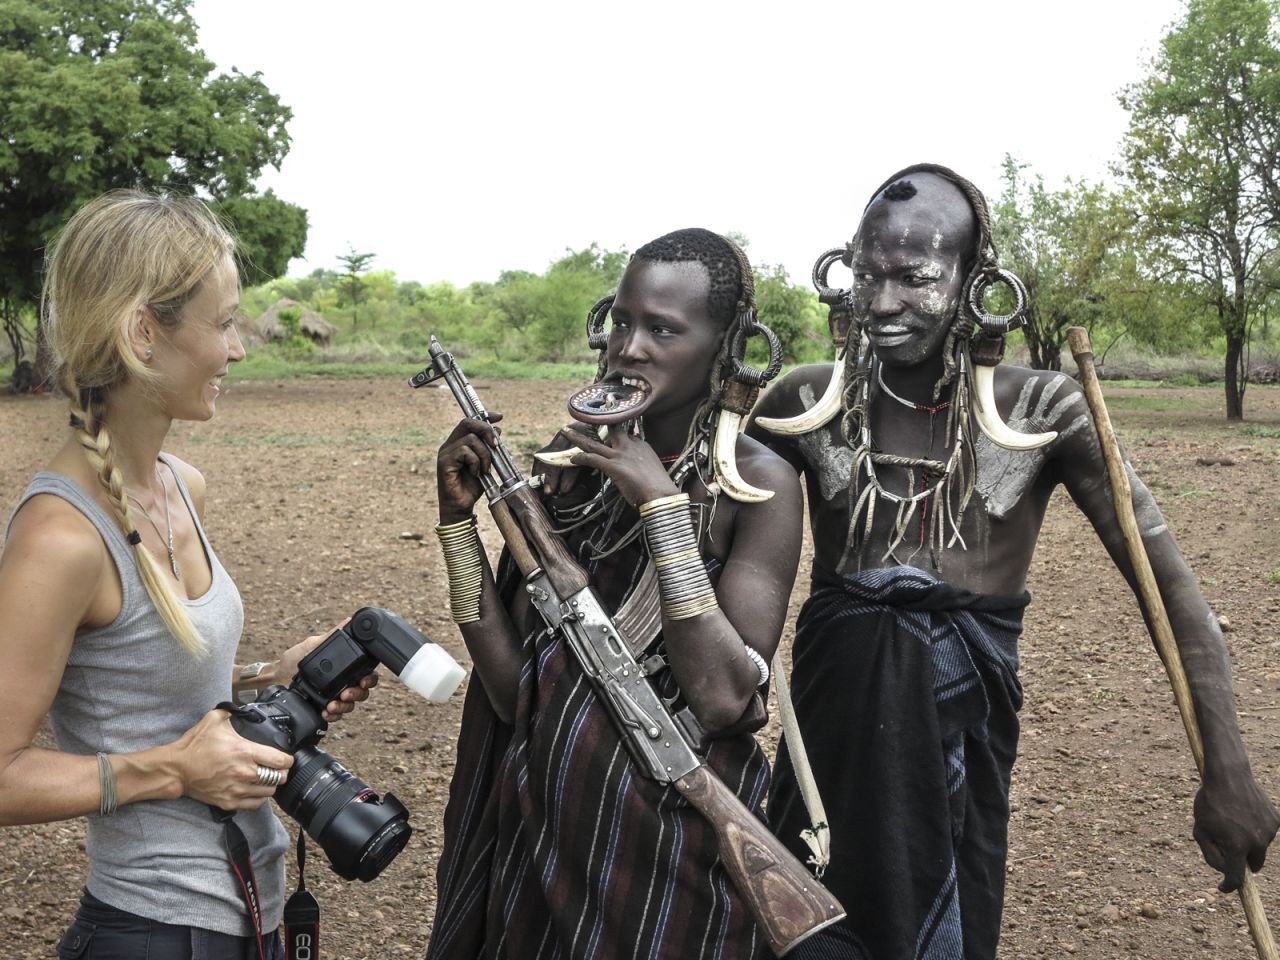 Seton has discussions with the Mursi tribe while taking photographs in their village.